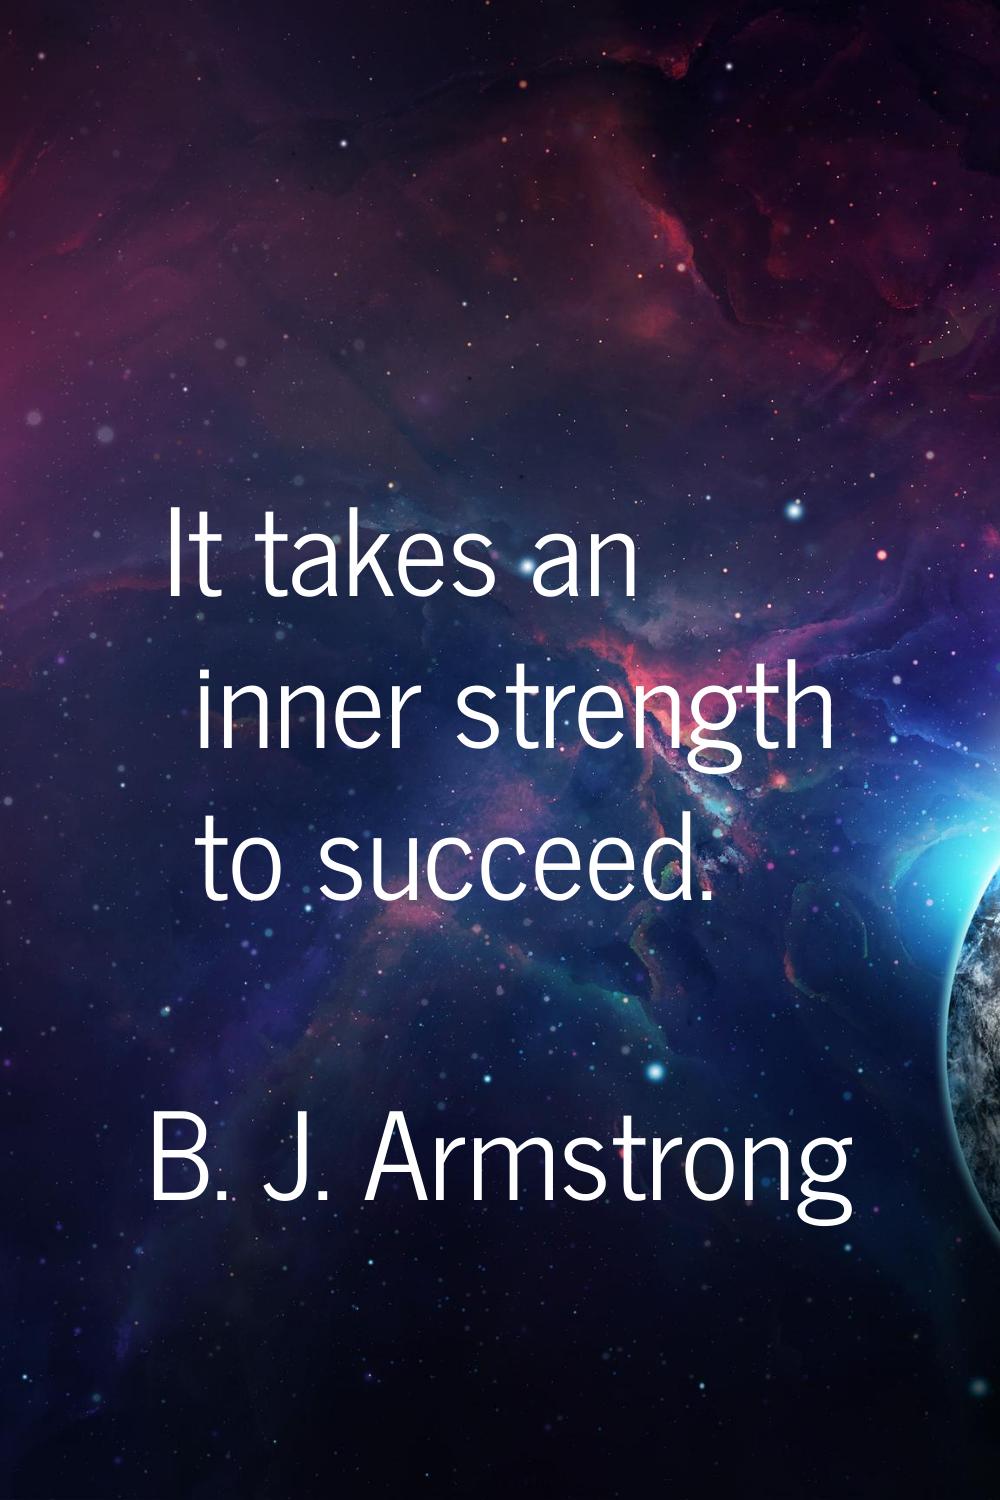 It takes an inner strength to succeed.